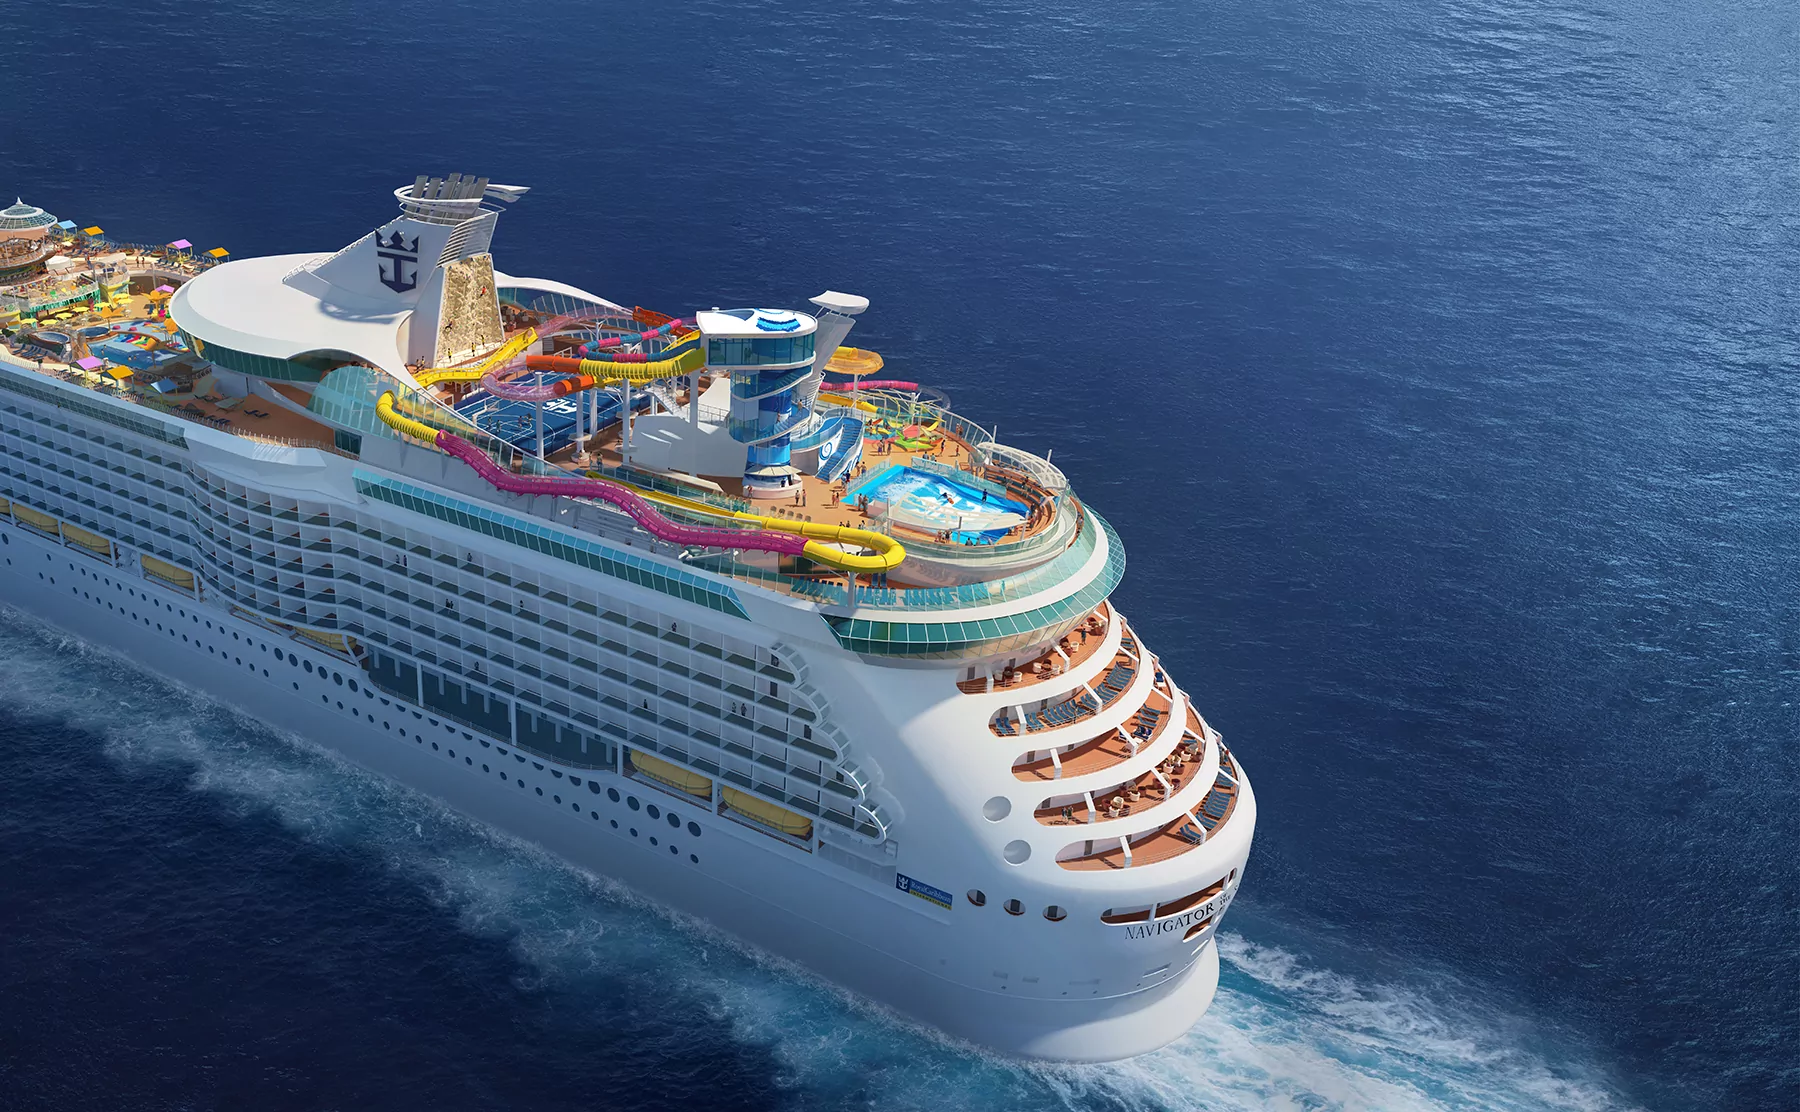 Royal Caribbean announces a $115 million upgrade for Navigator of the